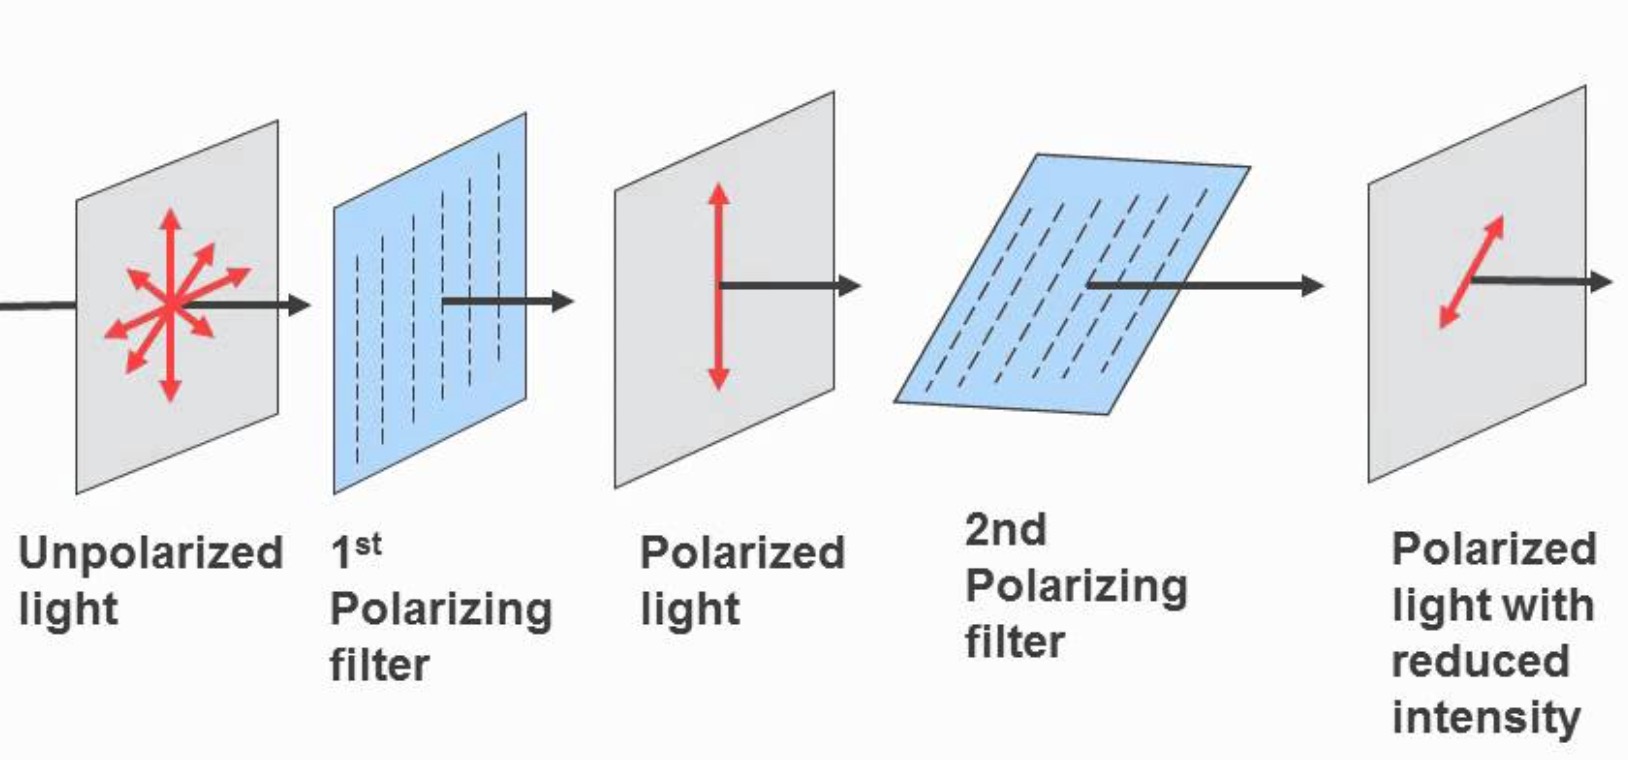 Light rays passing through two polarizers at different angles with respect to each other.